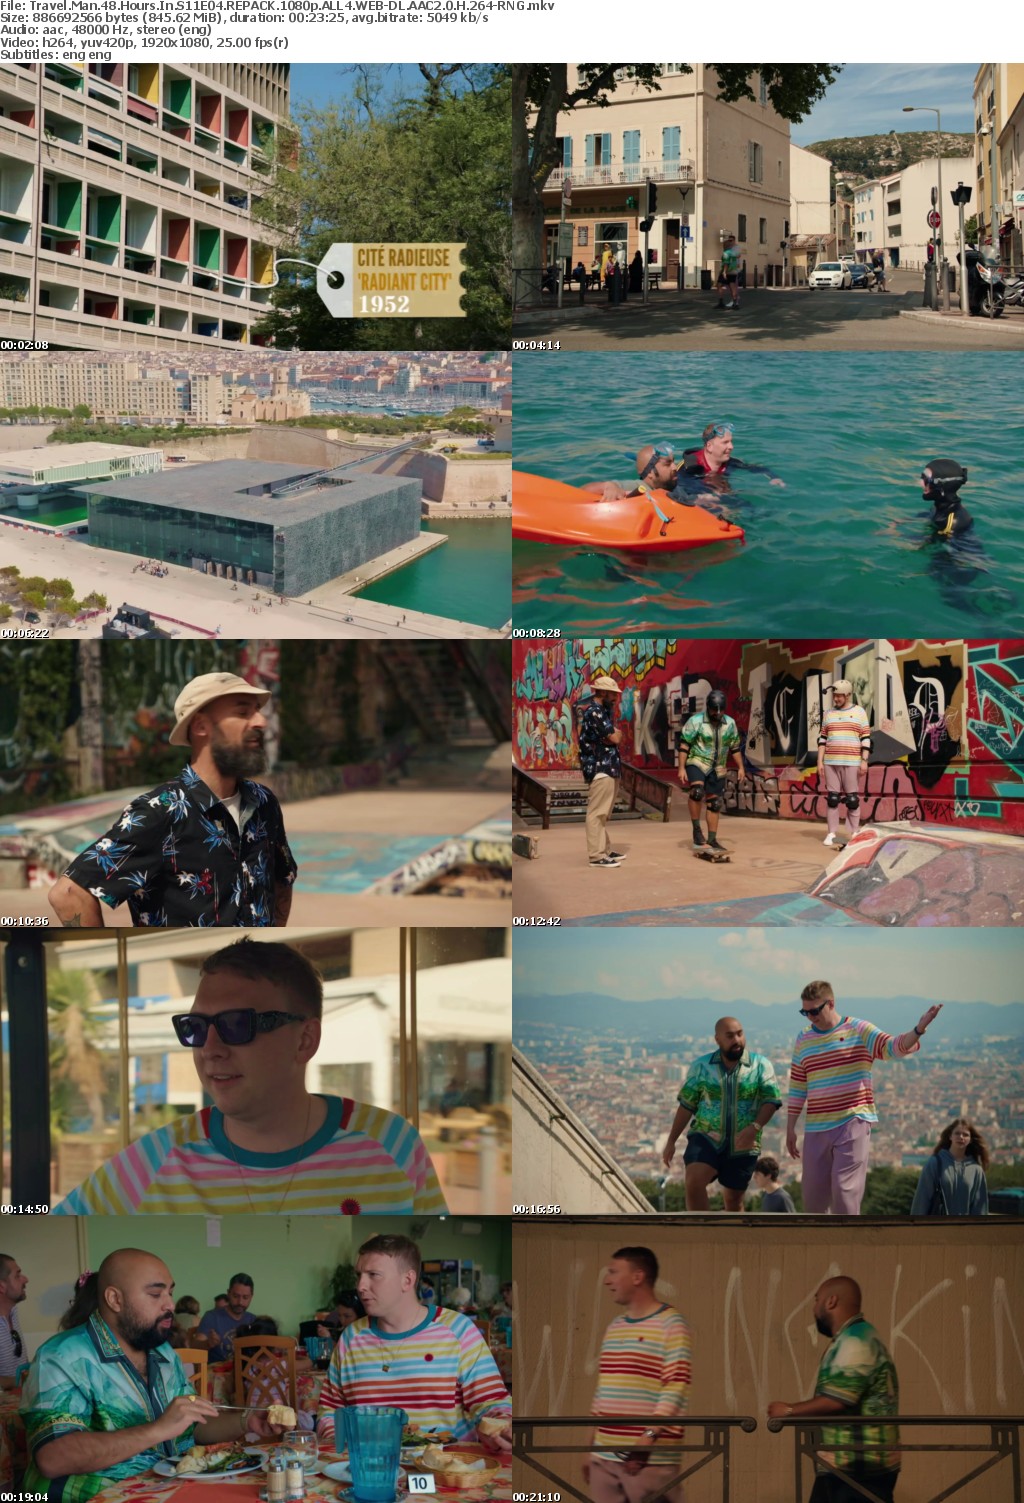 Travel Man 48 Hours In S11 1080p ALL4 WEBRip AAC2 0 x264-RNG